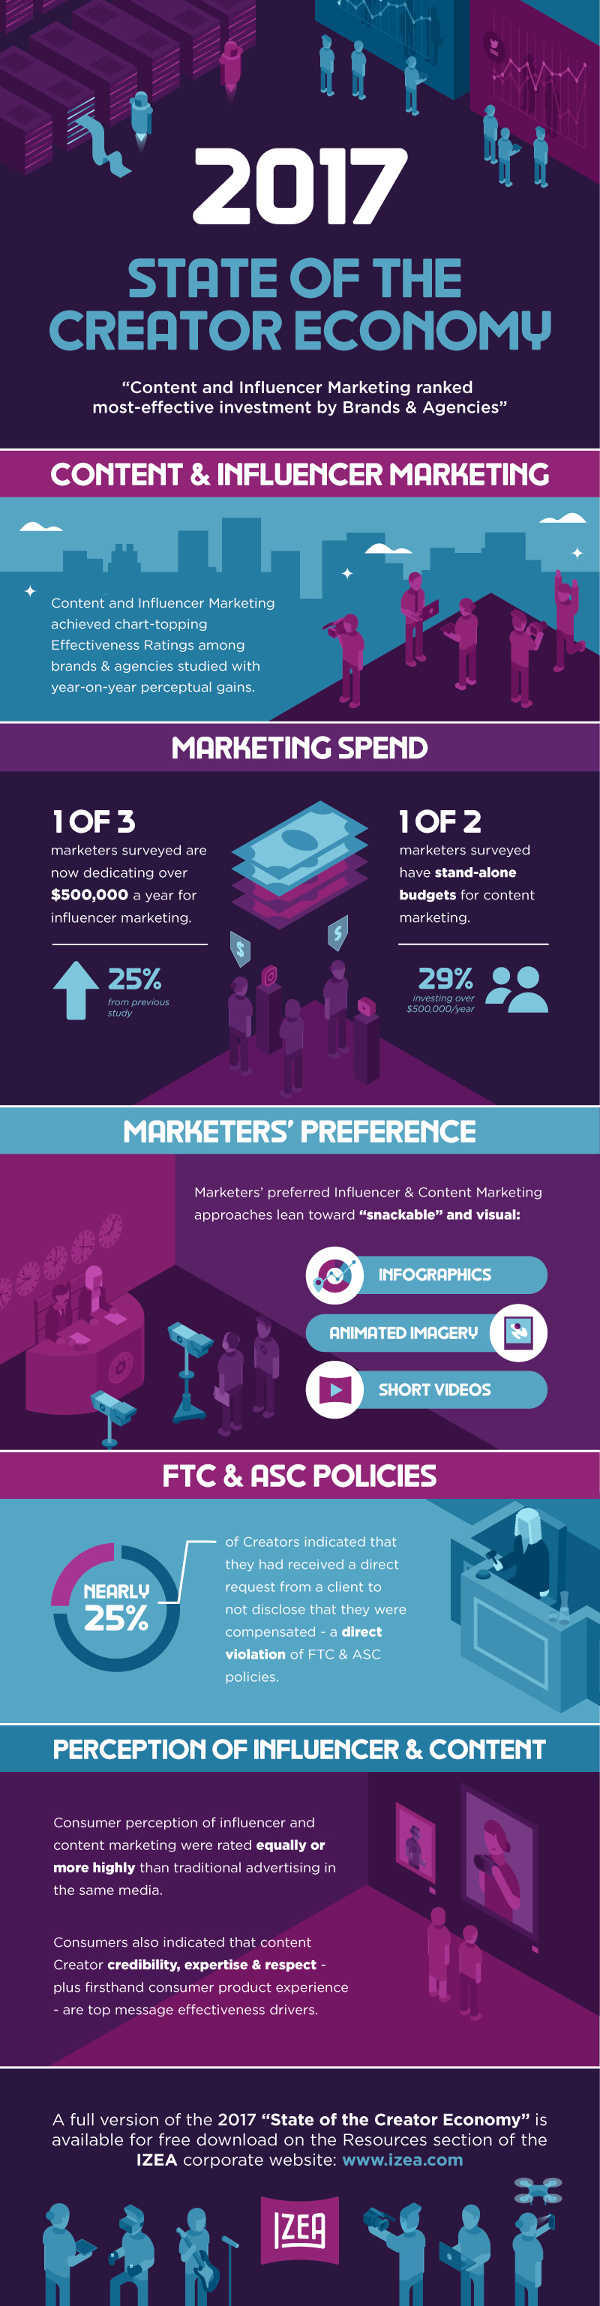 The State of Content and Influencer Marketing